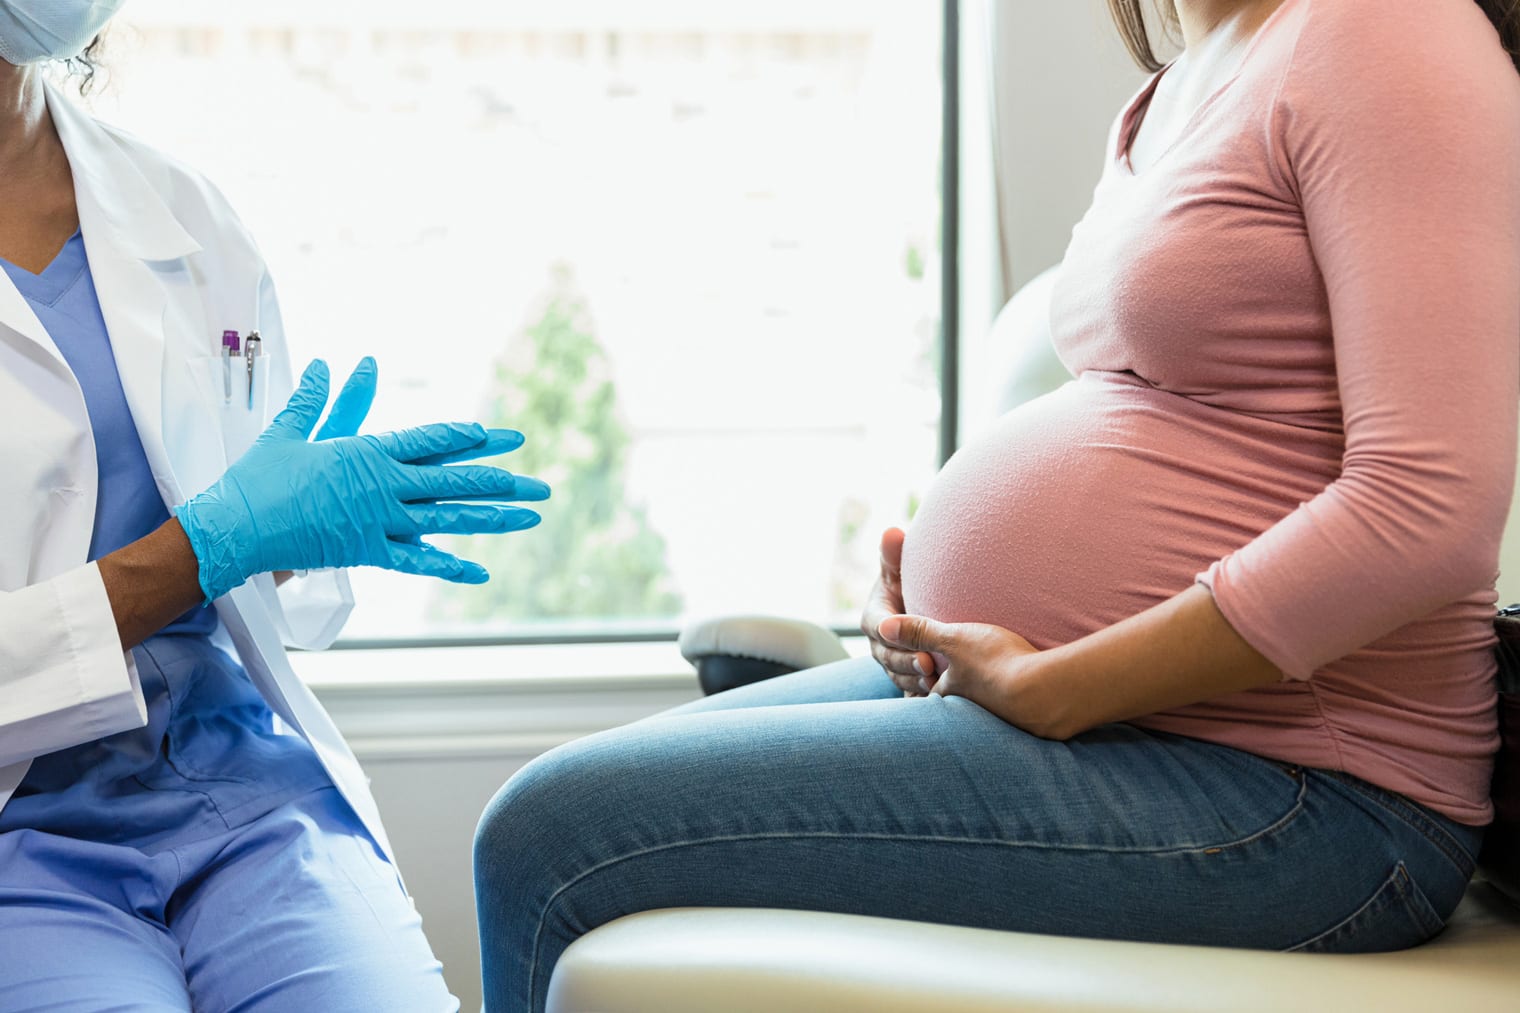 Southern States Offer Worst Access to Prenatal, Maternal Care ...